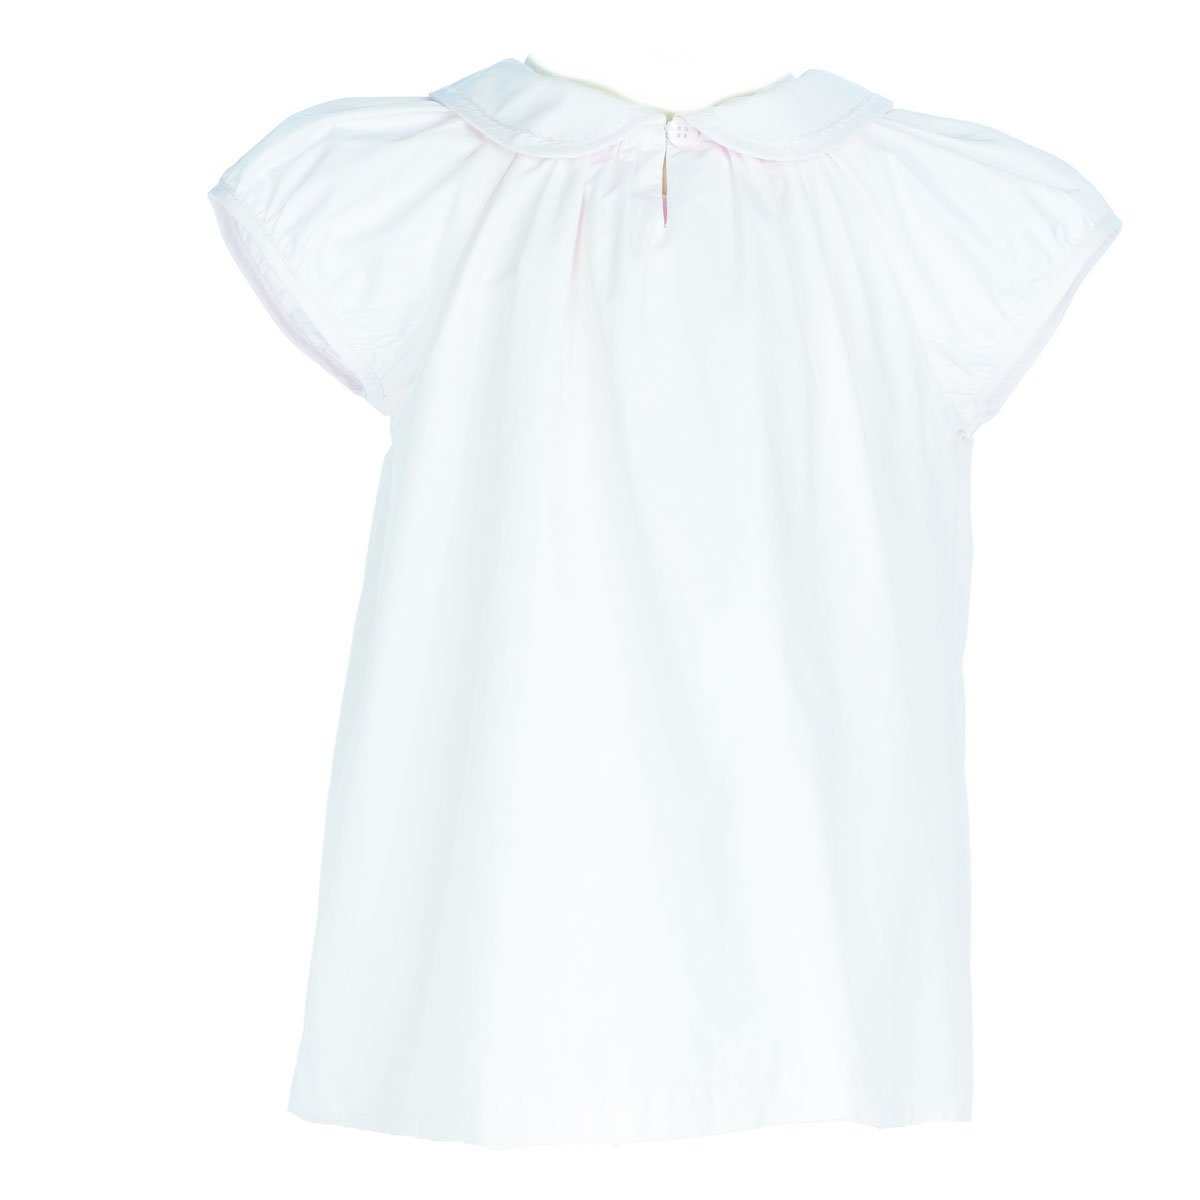 white cotton blouse for girls, front